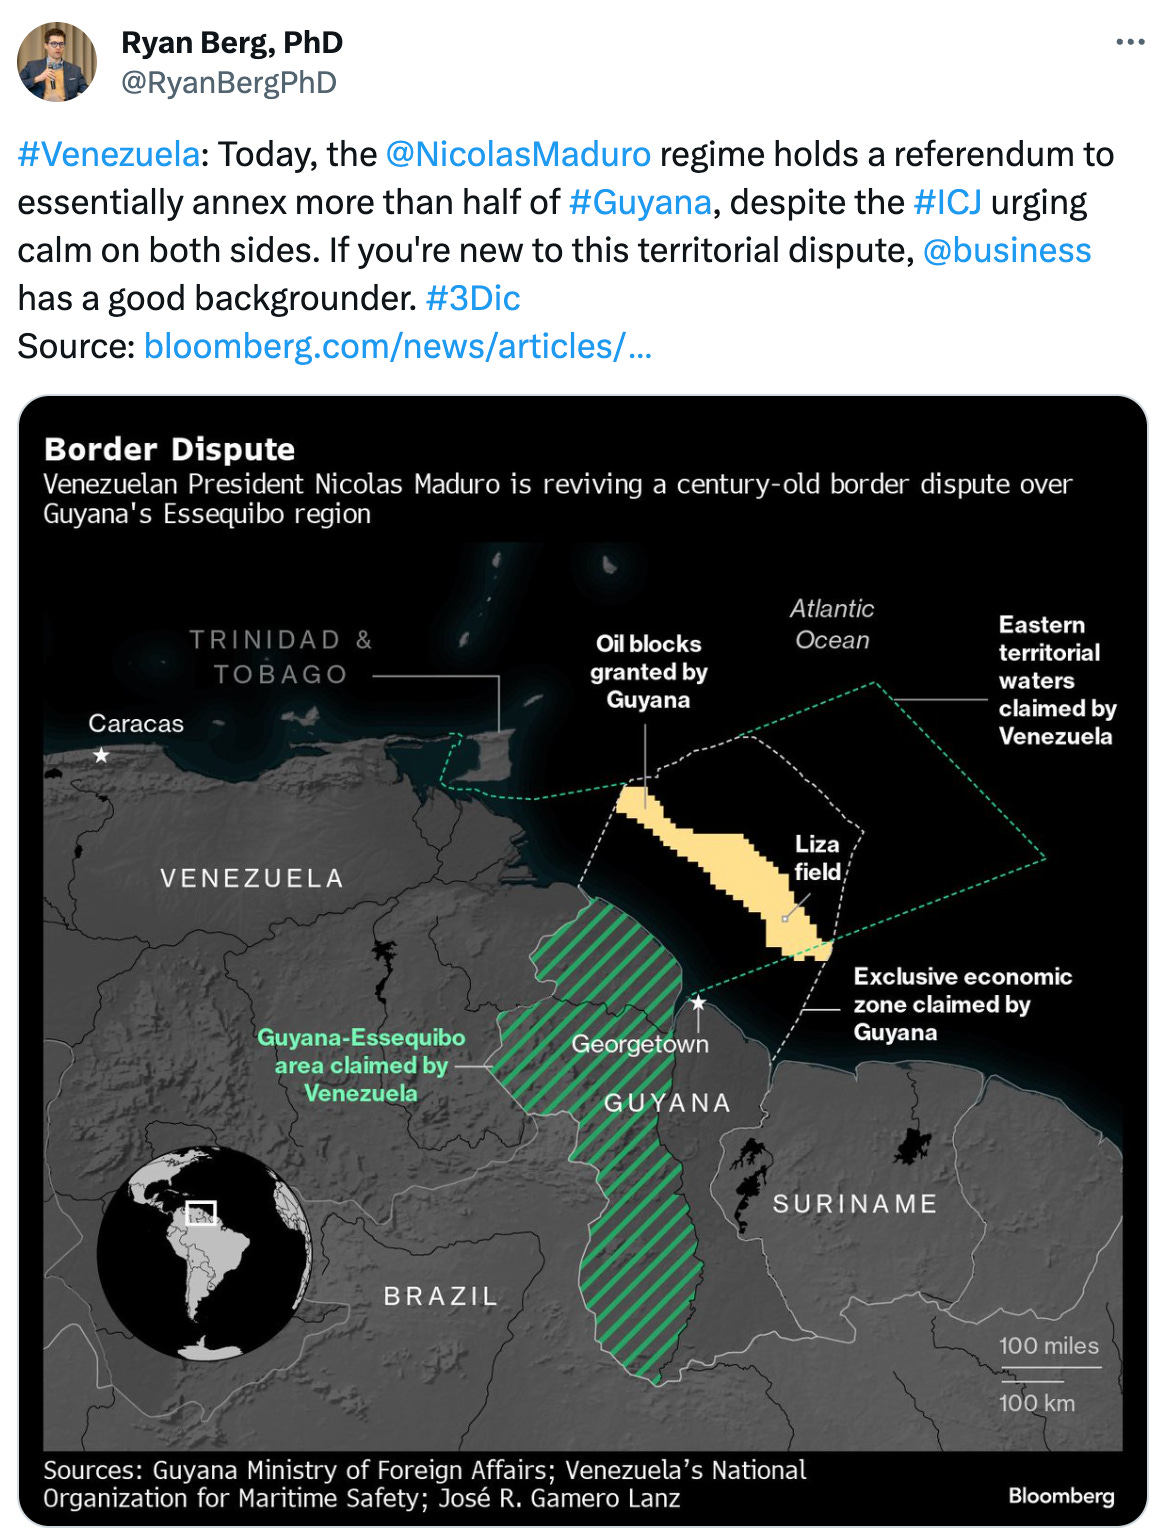  See new posts Conversation Ryan Berg, PhD @RyanBergPhD #Venezuela: Today, the  @NicolasMaduro  regime holds a referendum to essentially annex more than half of #Guyana, despite the #ICJ urging calm on both sides. If you're new to this territorial dispute,  @business  has a good backgrounder. #3Dic  Source: https://bloomberg.com/news/articles/2023-12-02/venezuela-stirs-nationalism-in-dispute-over-oil-rich-territory